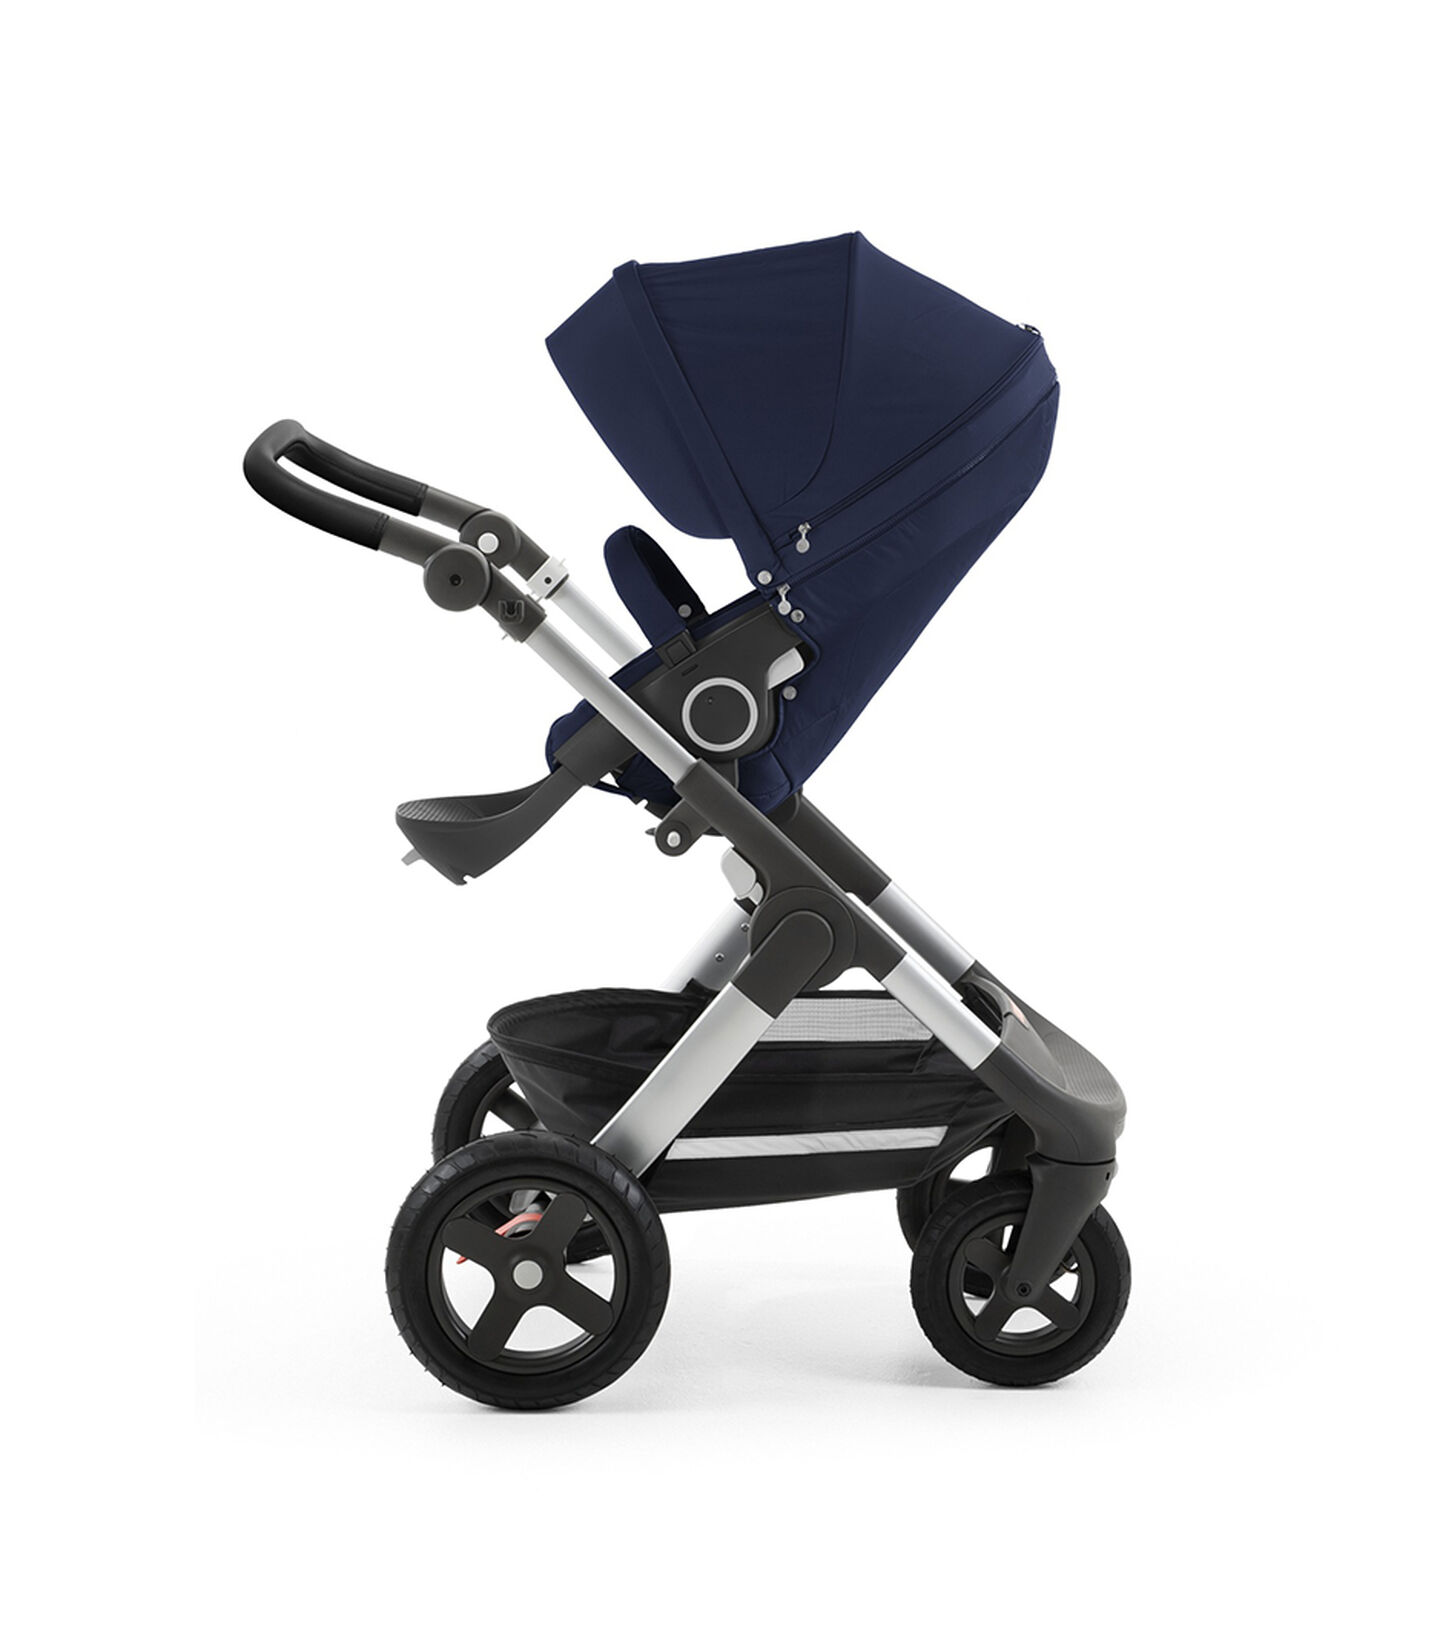 Stokke® Trailz™ with silver chassis and Stokke® Stroller Seat, Deep Blue. Leatherette Handle. Terrain Wheels. view 1